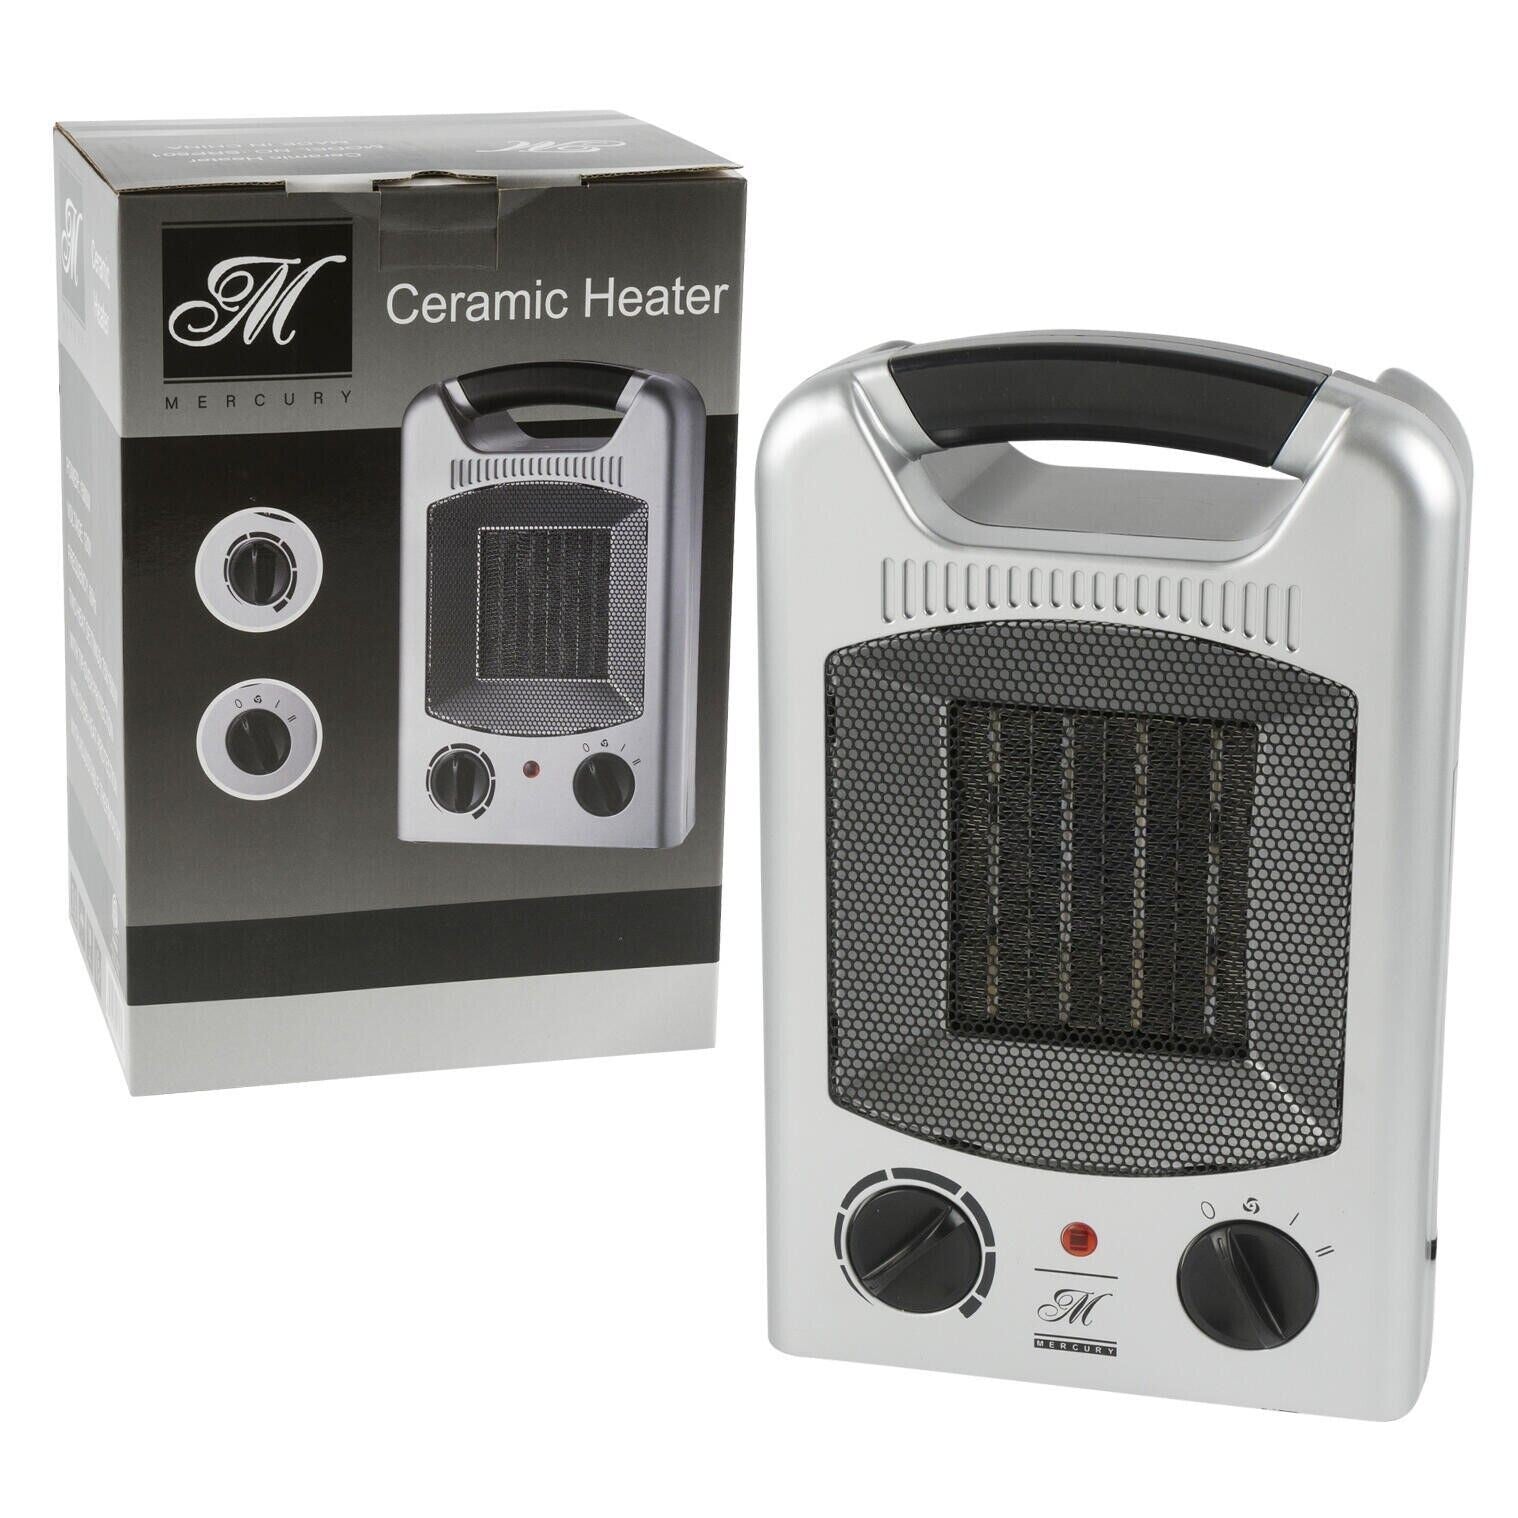 This Space Heater & Fan 1500W Portable Adjustable 2-Settings Ceramic Silver and Black is made with love by Premier Homegoods! Shop more unique gift ideas today with Spots Initiatives, the best way to support creators.